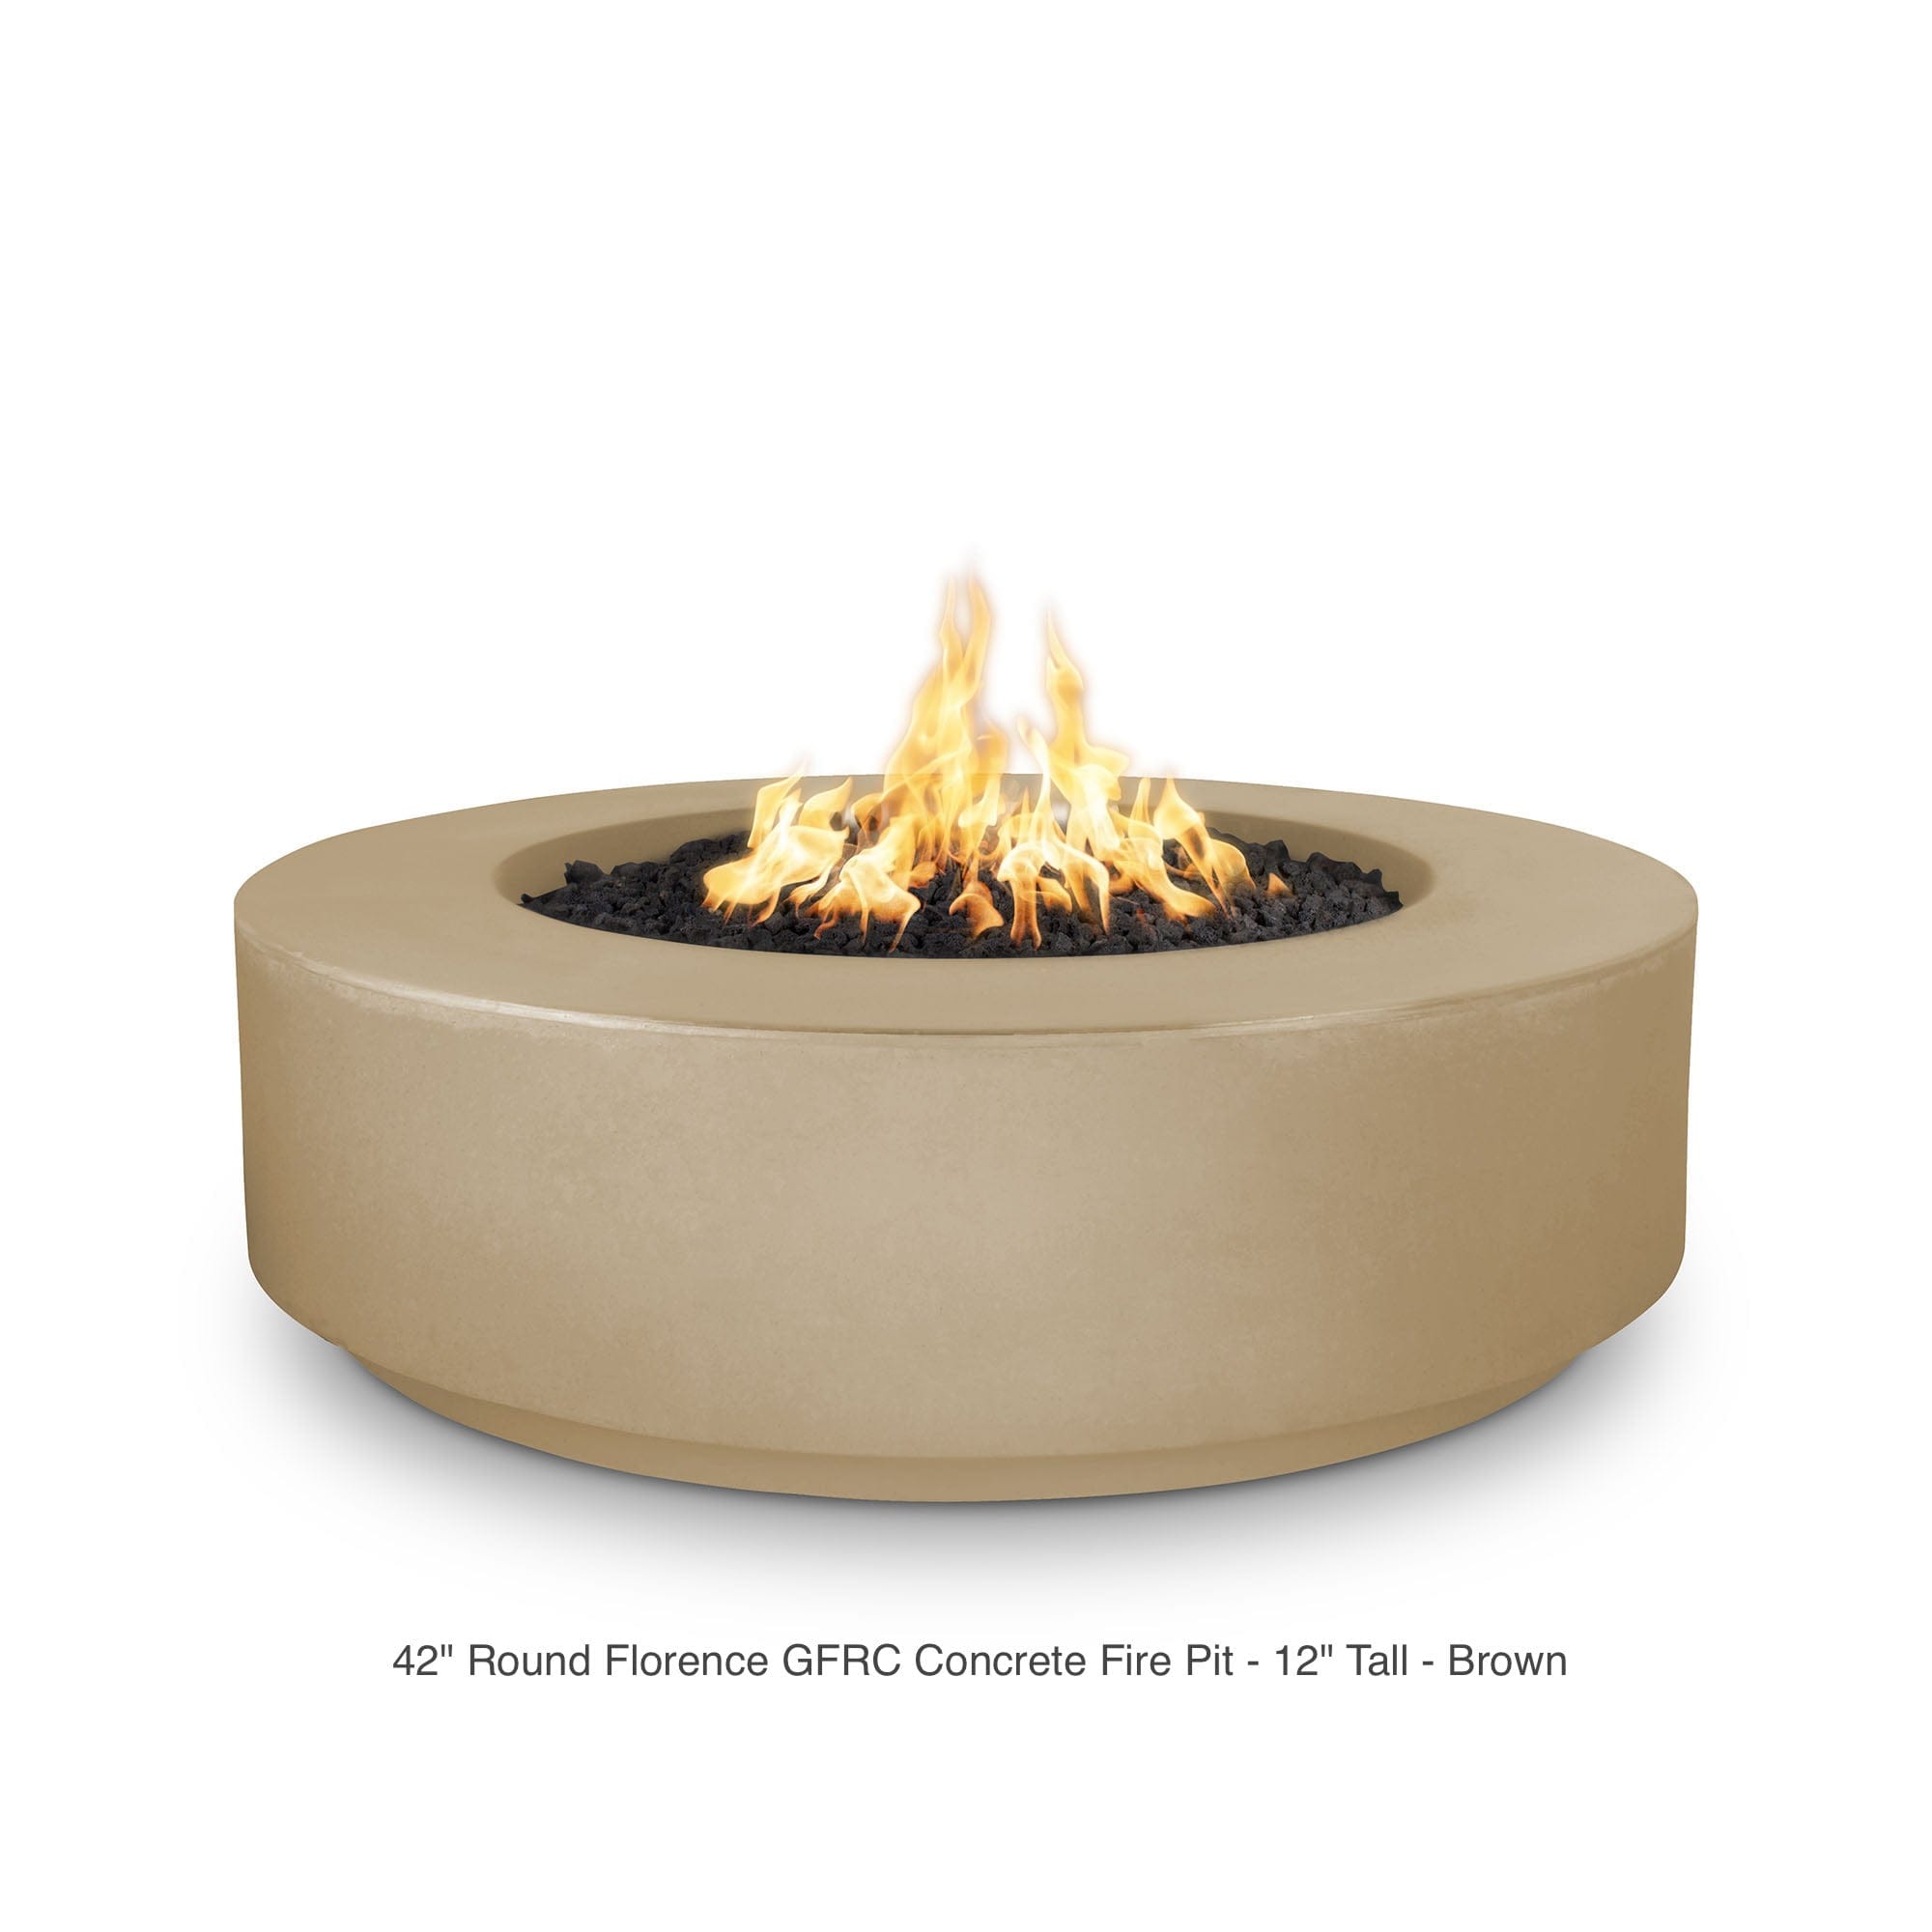 The Outdoor Plus Fire Features The Outdoor Plus 42" Round Florence GFRC Concrete Fire Pit - 12" Tall / OPT-FL42, OPT-FL42FSML, OPT-FL42FSEN, OPT-FL42E12V, OPT-FL42EKIT